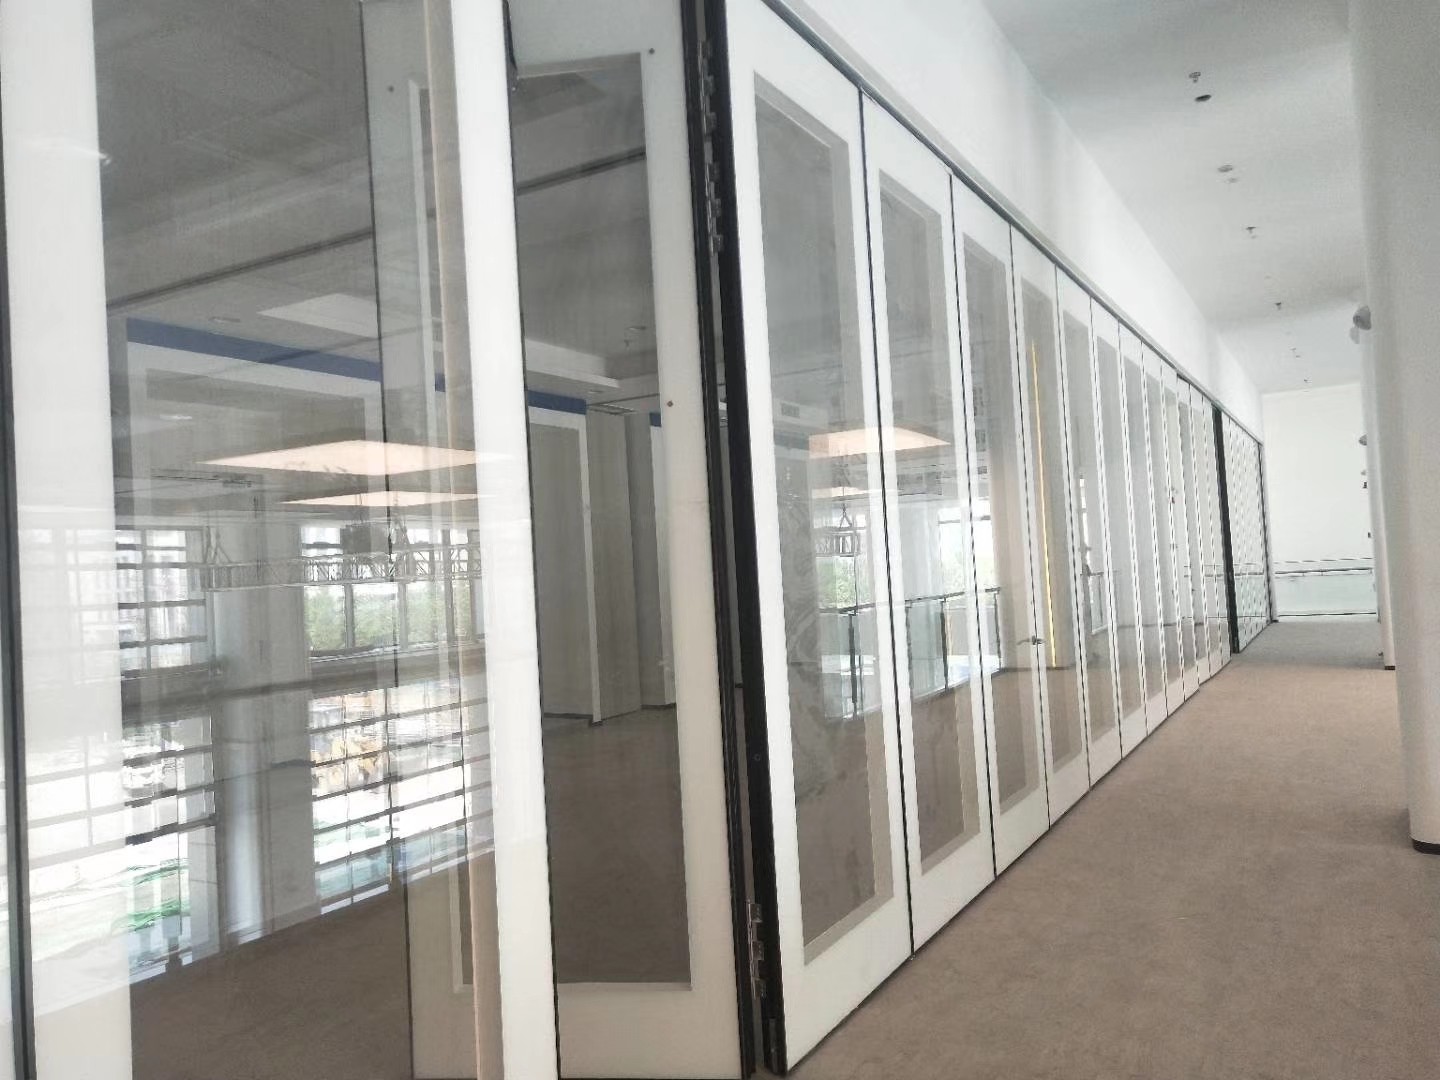 Semi-automatic Operable Partition Walls